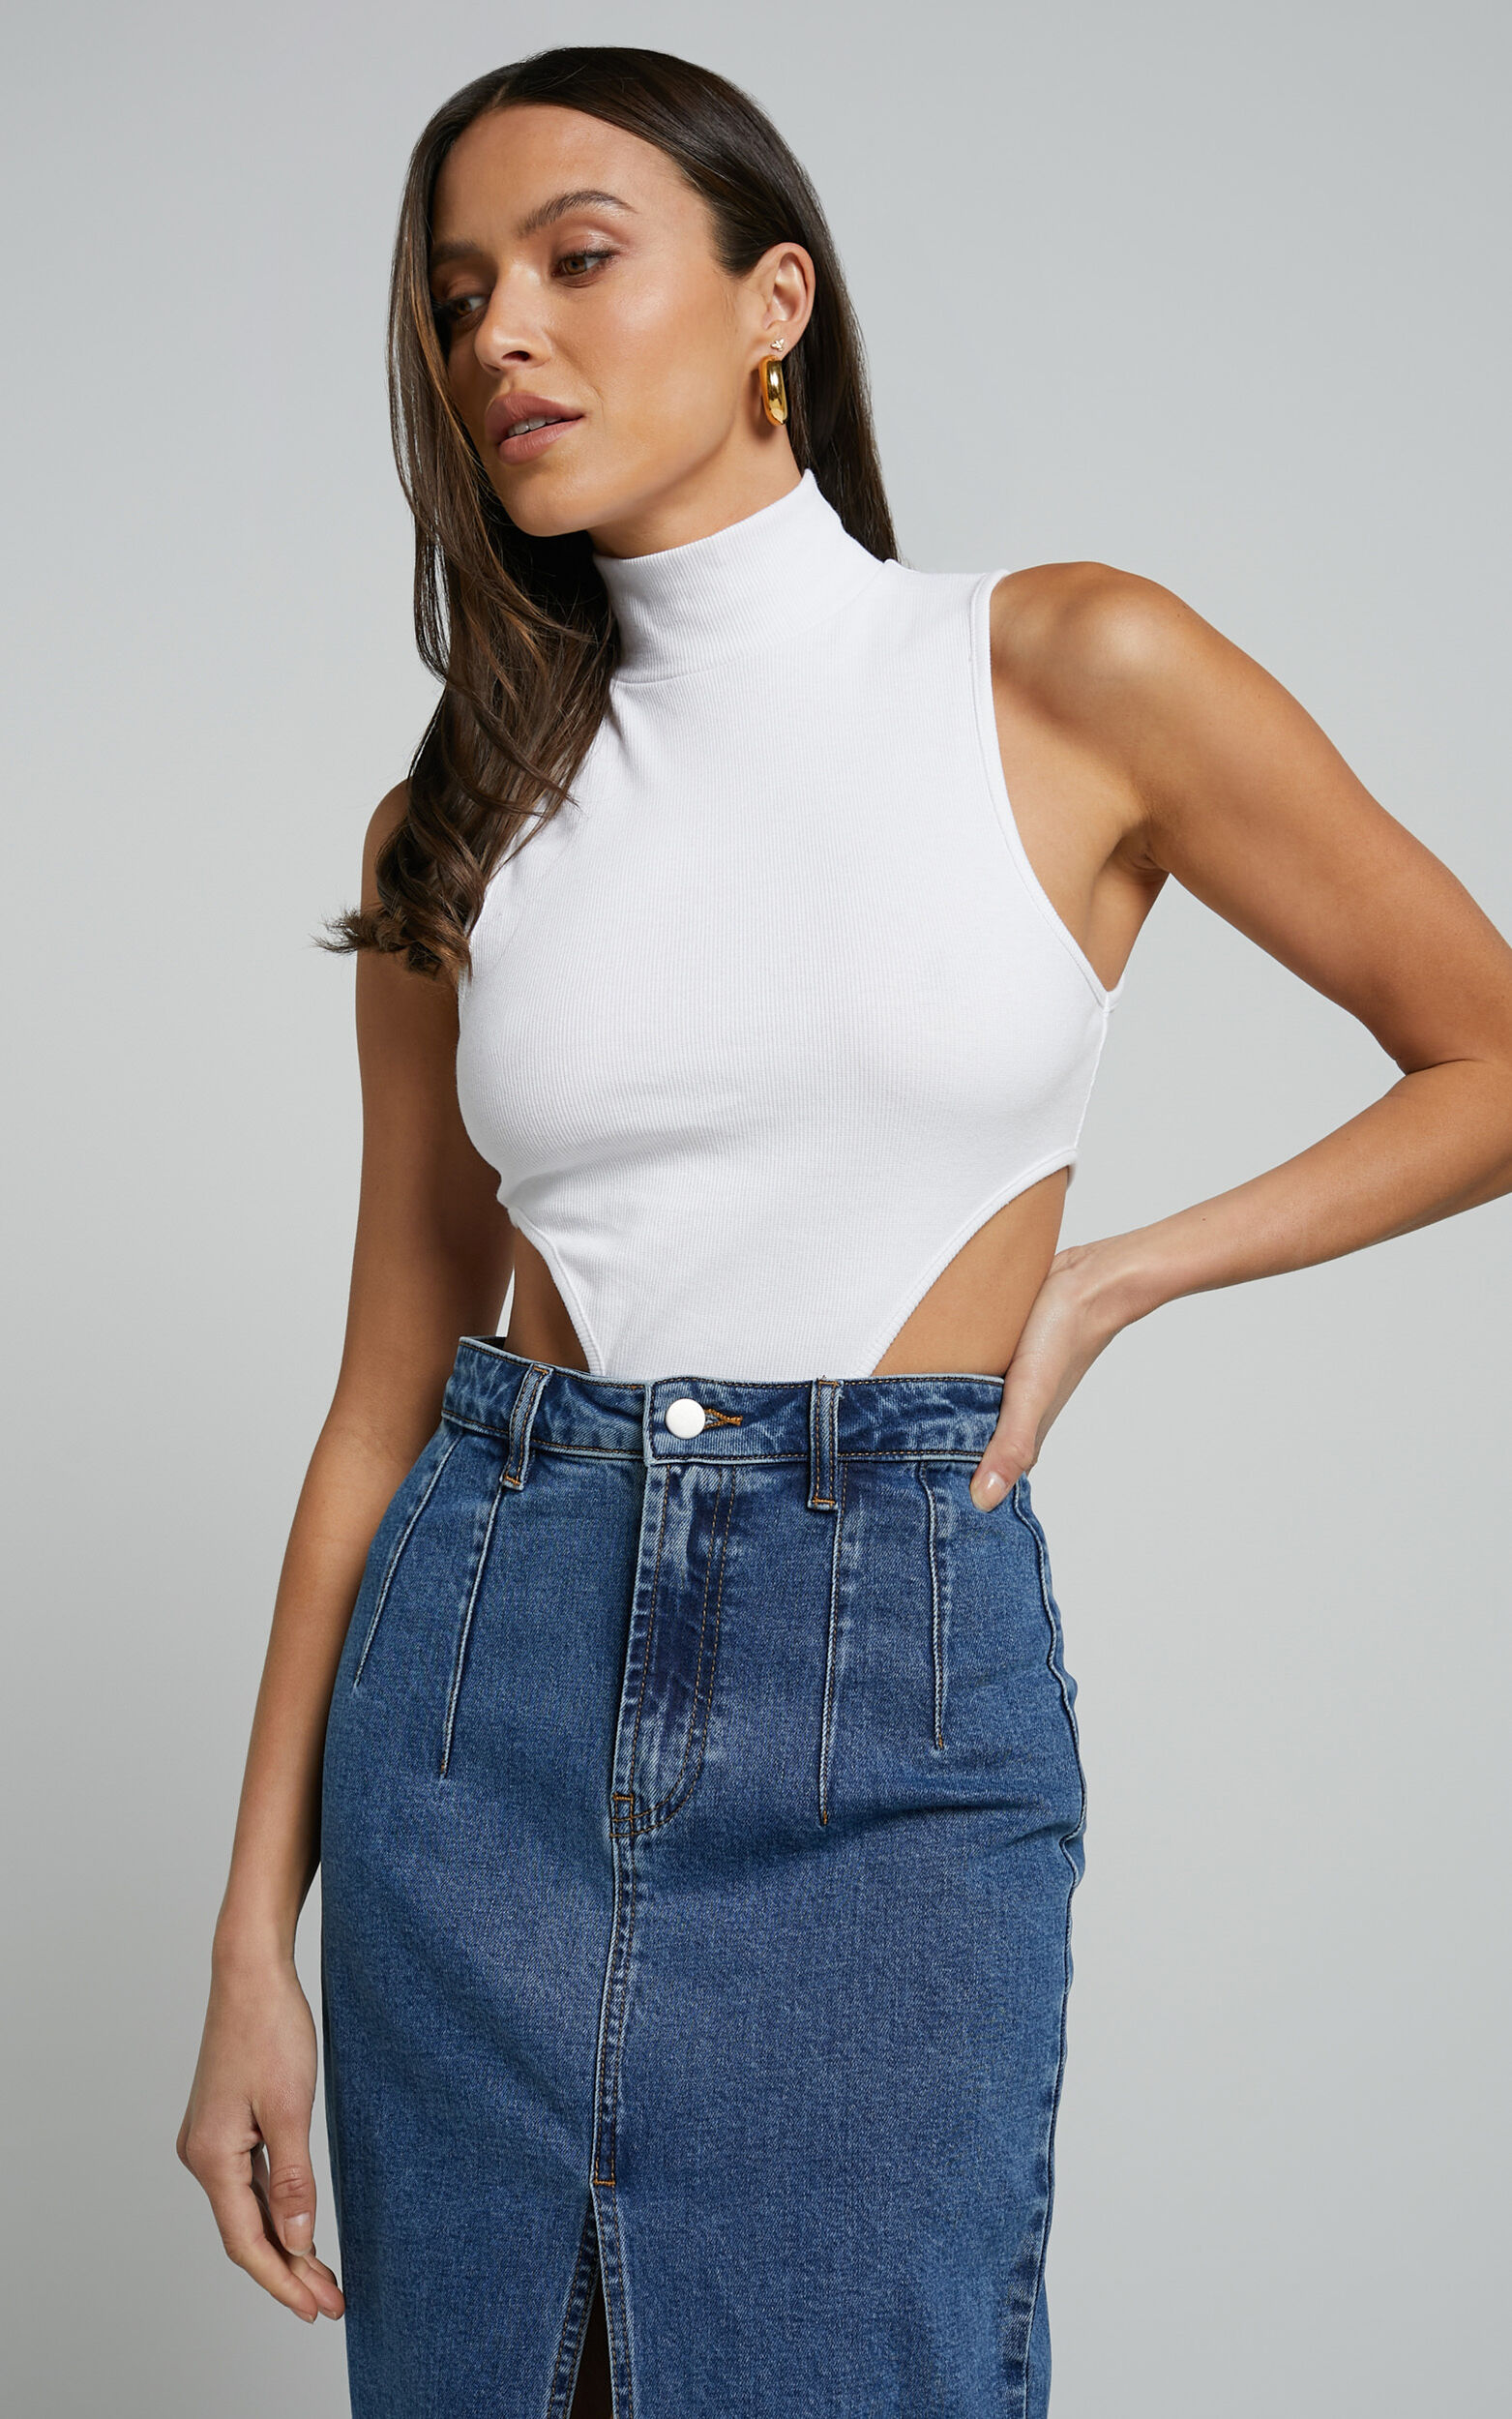 SLEEVLESS RIBBED COTTON HIGH CUT BODY SUIT CROP